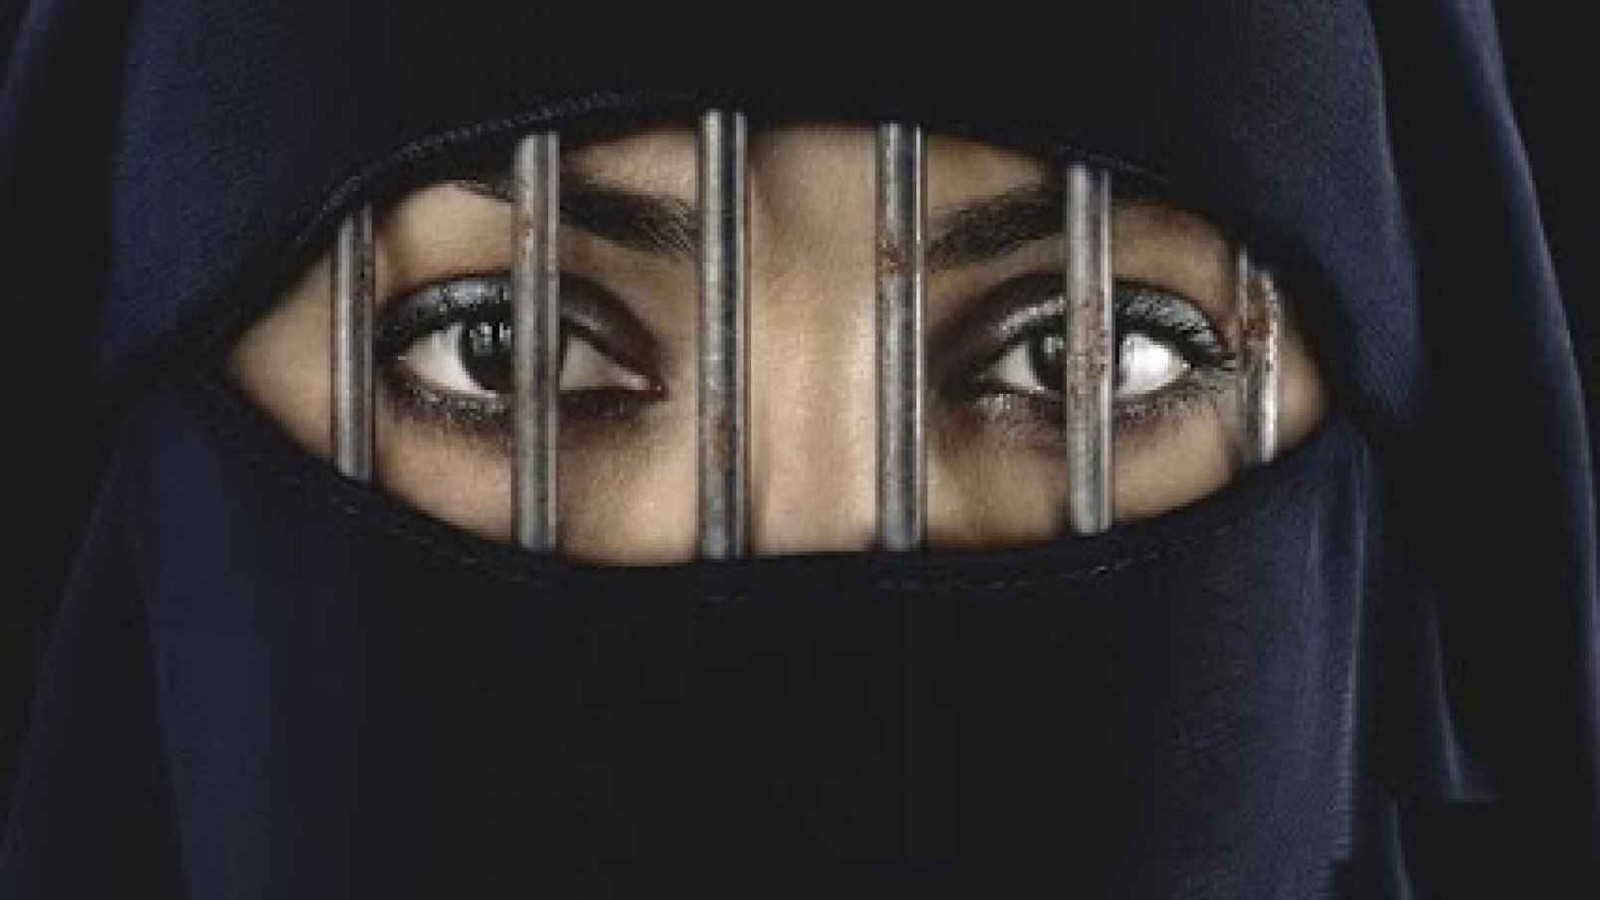 Women in Islam: Oppressed or Liberated?